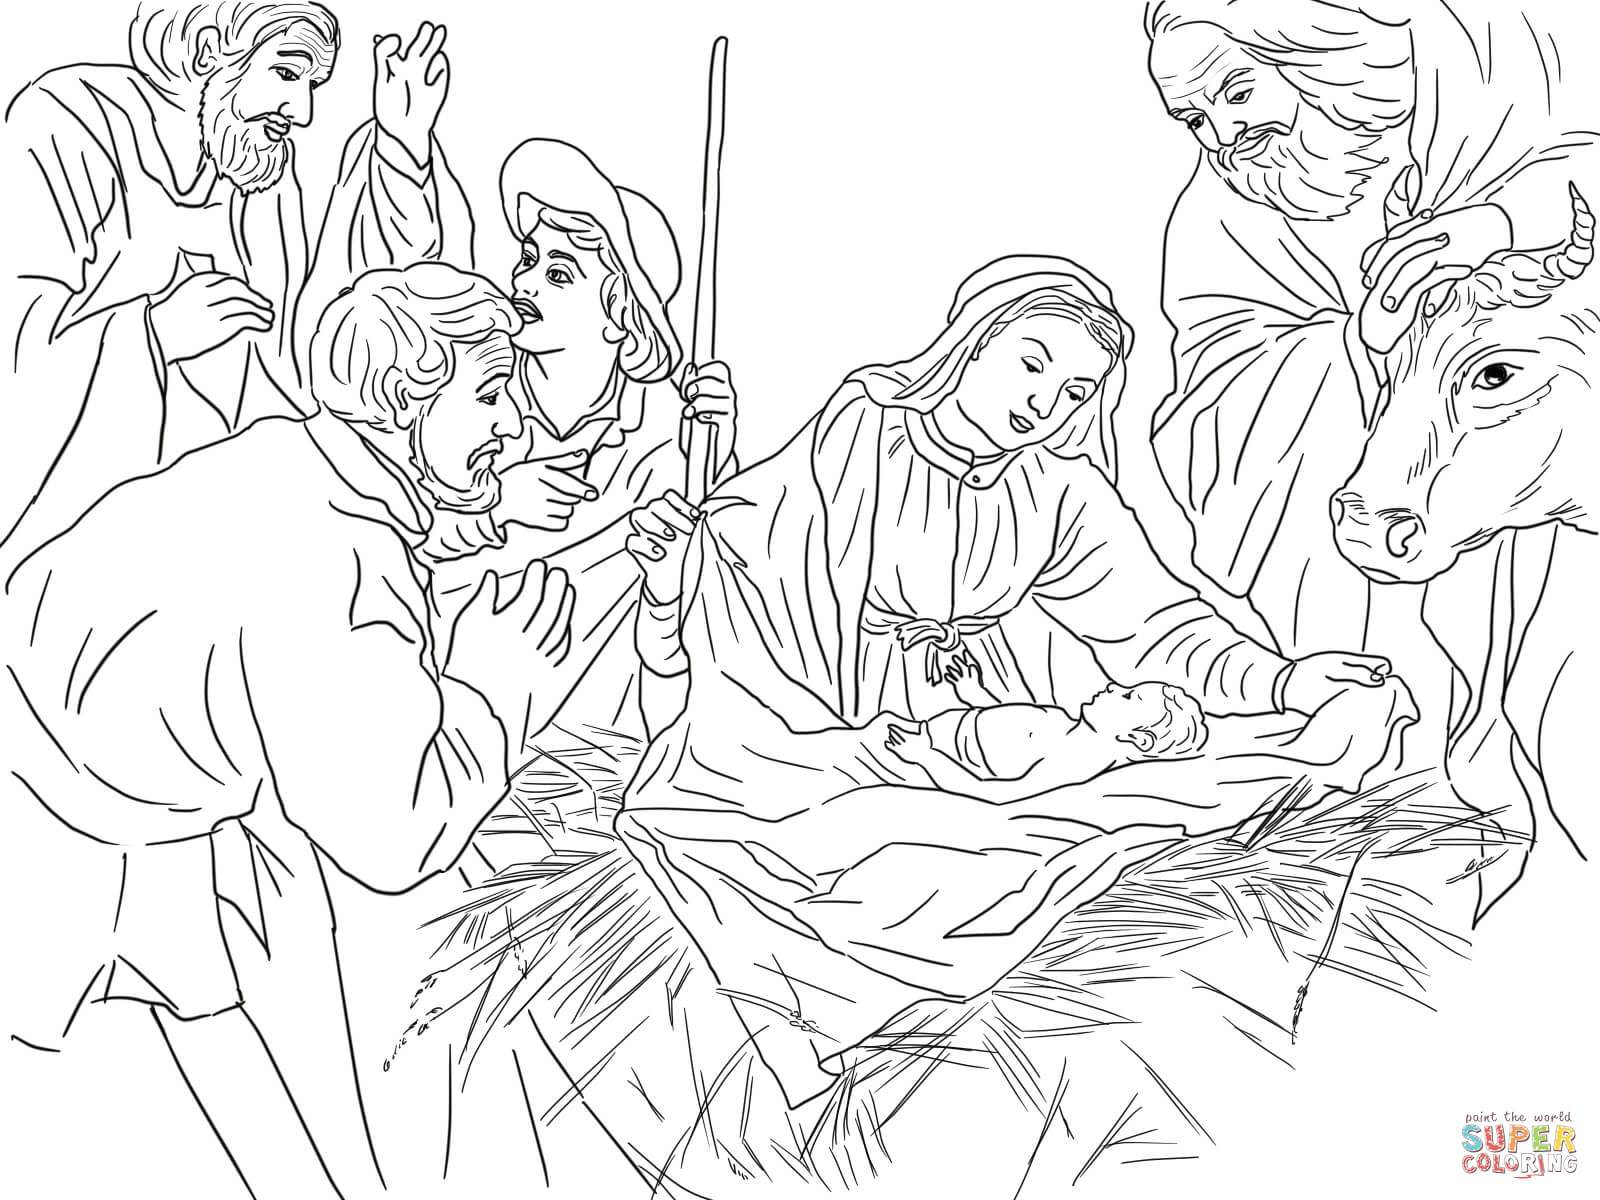 Coloring Pages Sheep And The Shepherd Jesus The Good Shepherd Coloring Pages At Getdrawings Free For